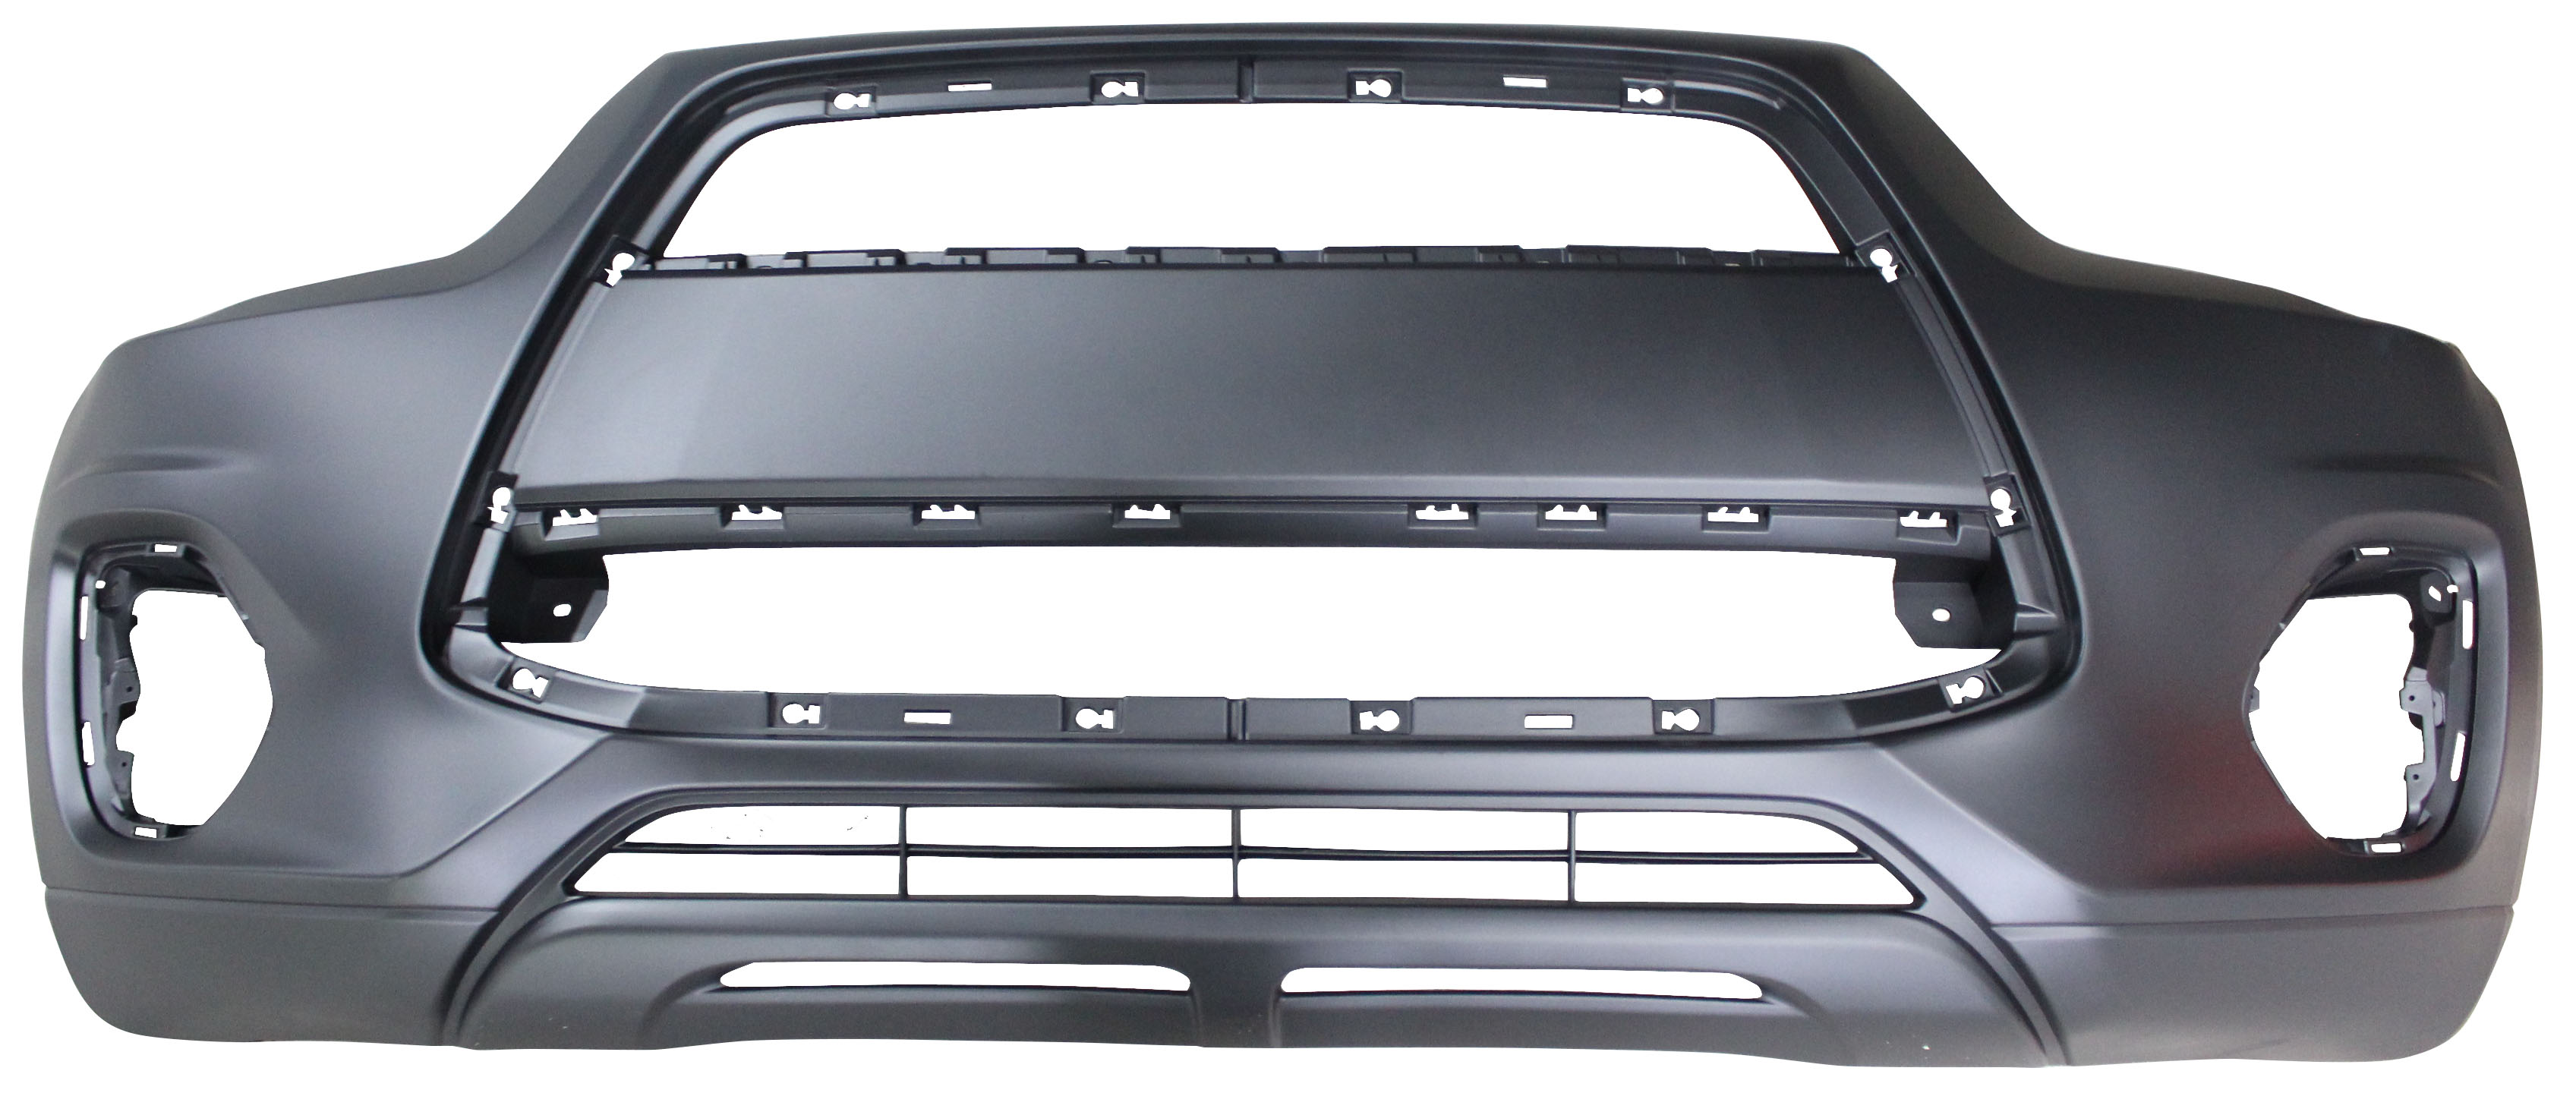 Aftermarket BUMPER COVERS for MITSUBISHI - OUTLANDER SPORT, OUTLANDER SPORT,13-15,Front bumper cover